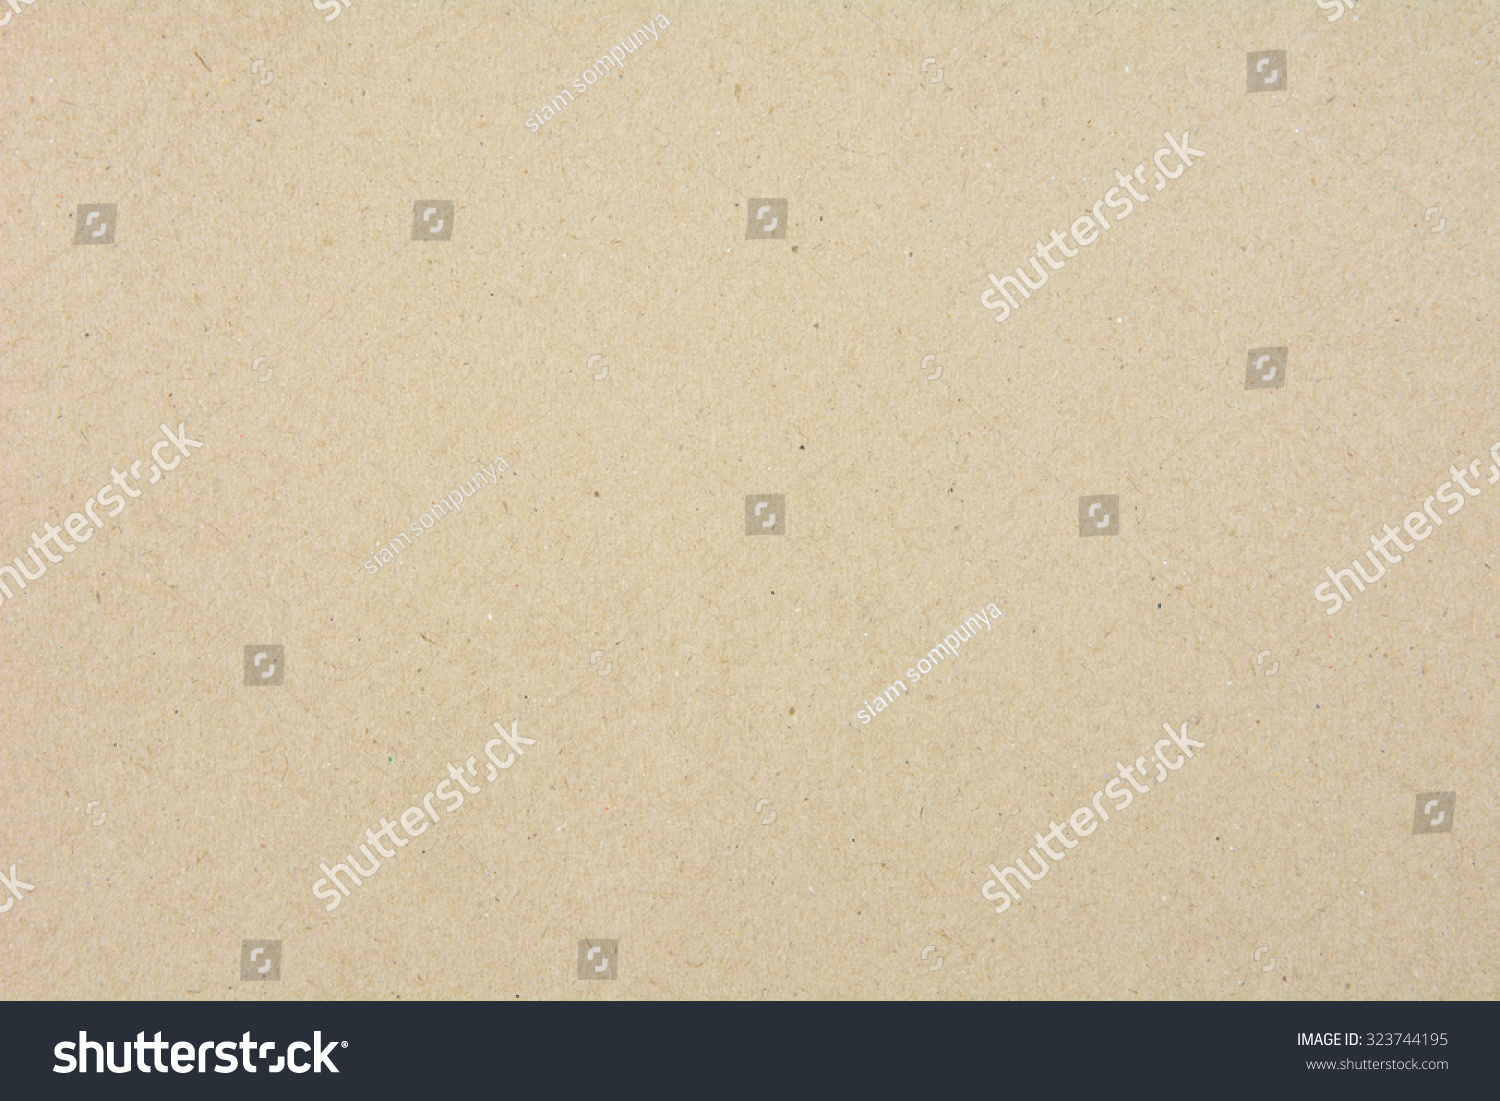 Paper background #323744195